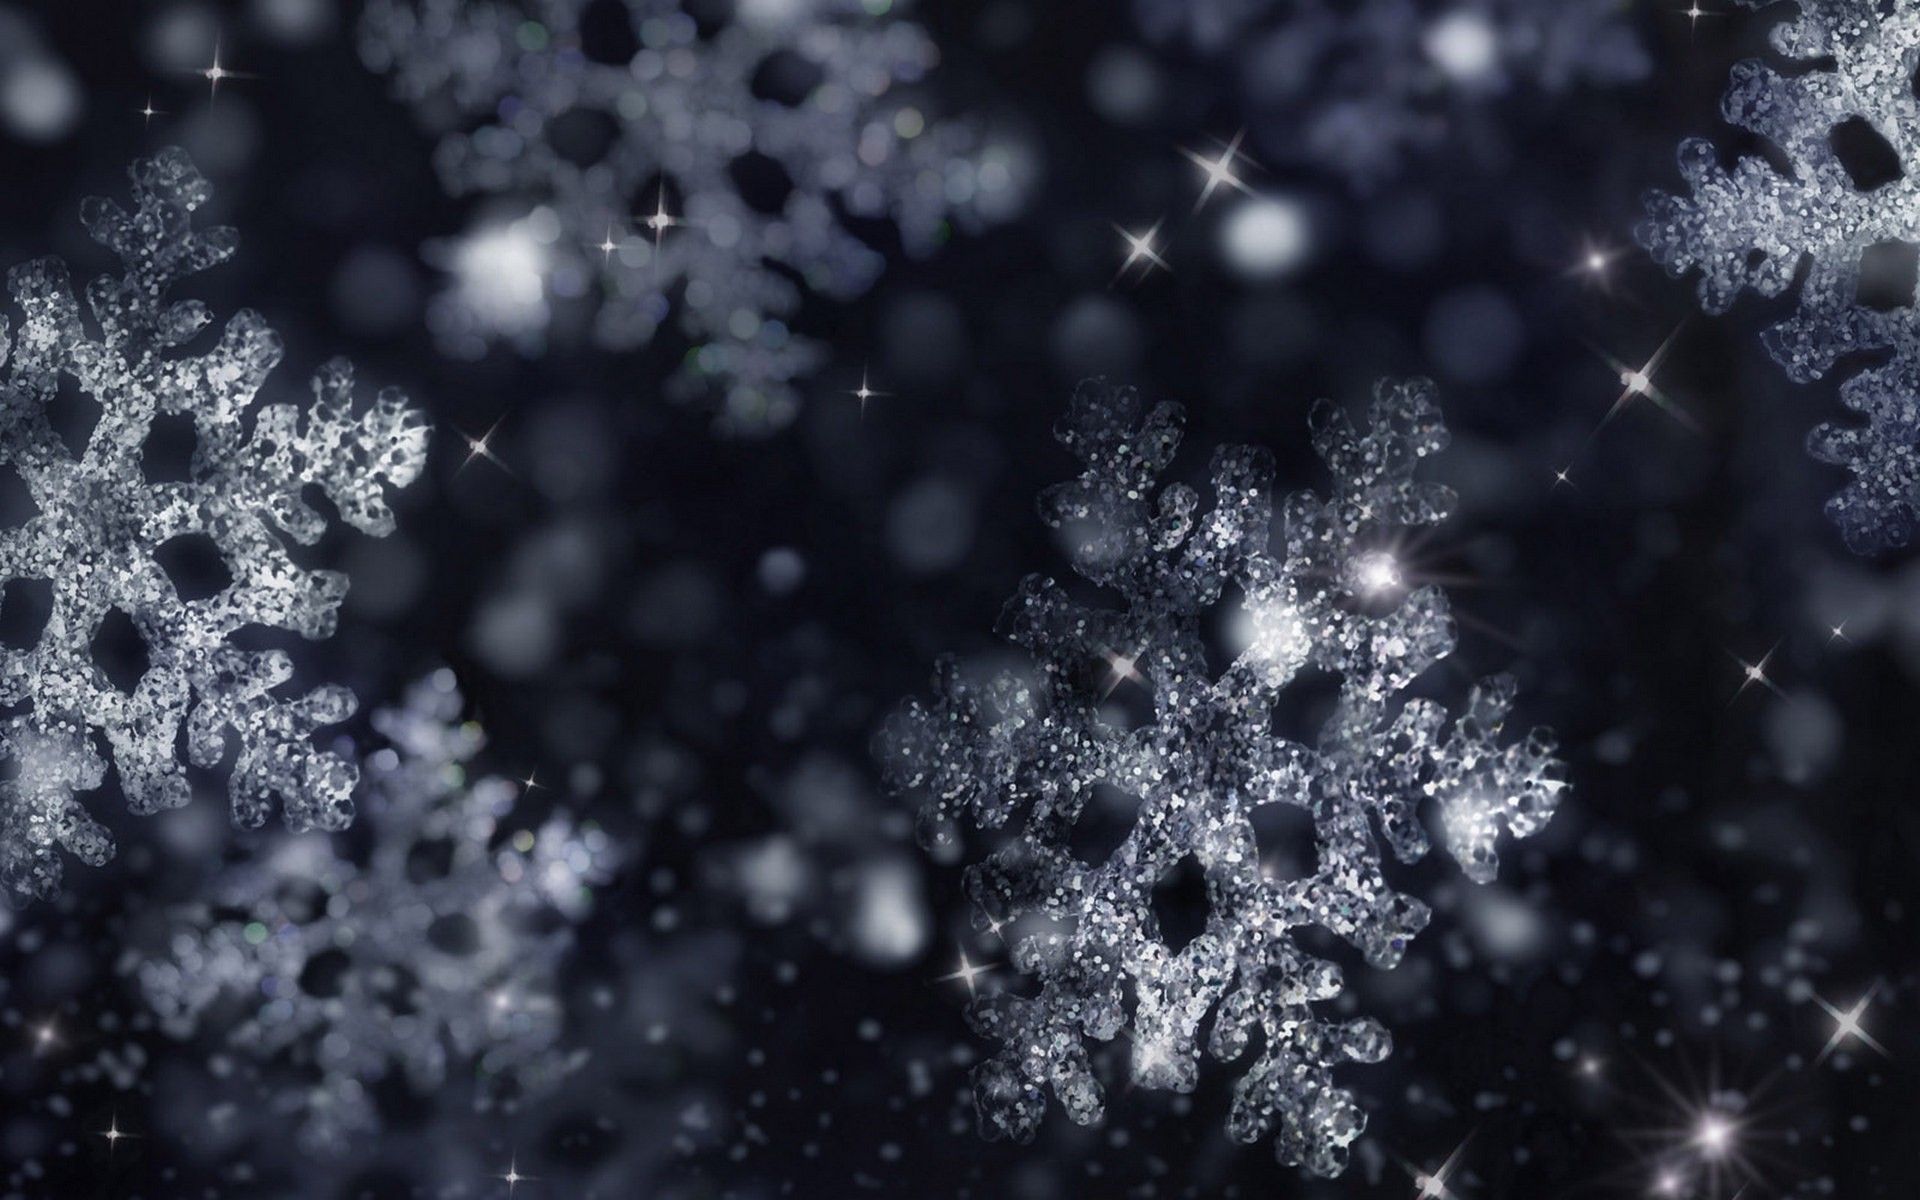 Snowflakes wallpaper for your computer desktop background - Snowflake